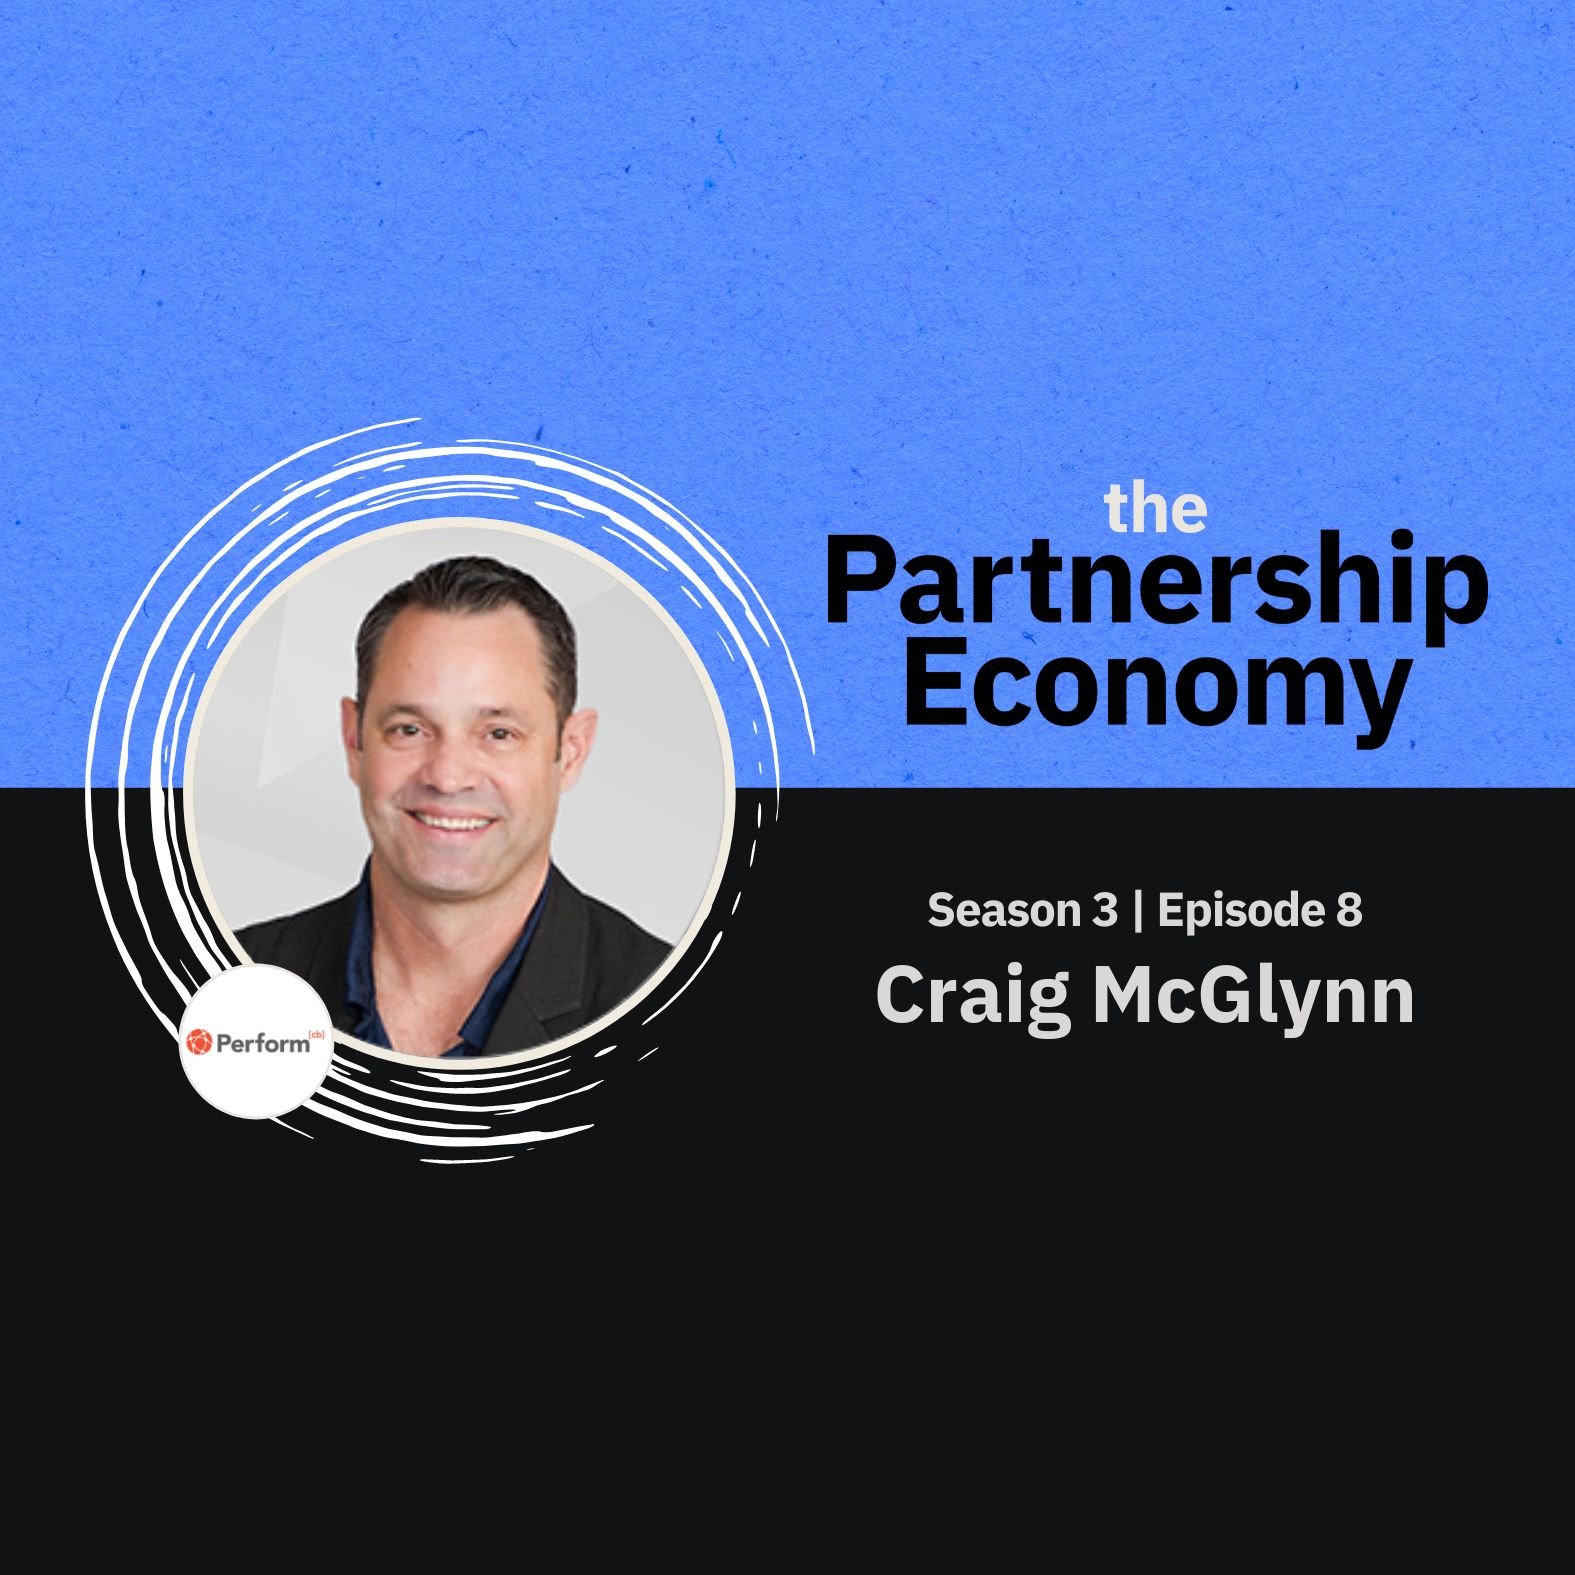 Episode cover art for Craig McGlynn, Managing Director and Executive Vice President of Agency at Perform[cb], on the benefits of running an affiliate program alongside an agency